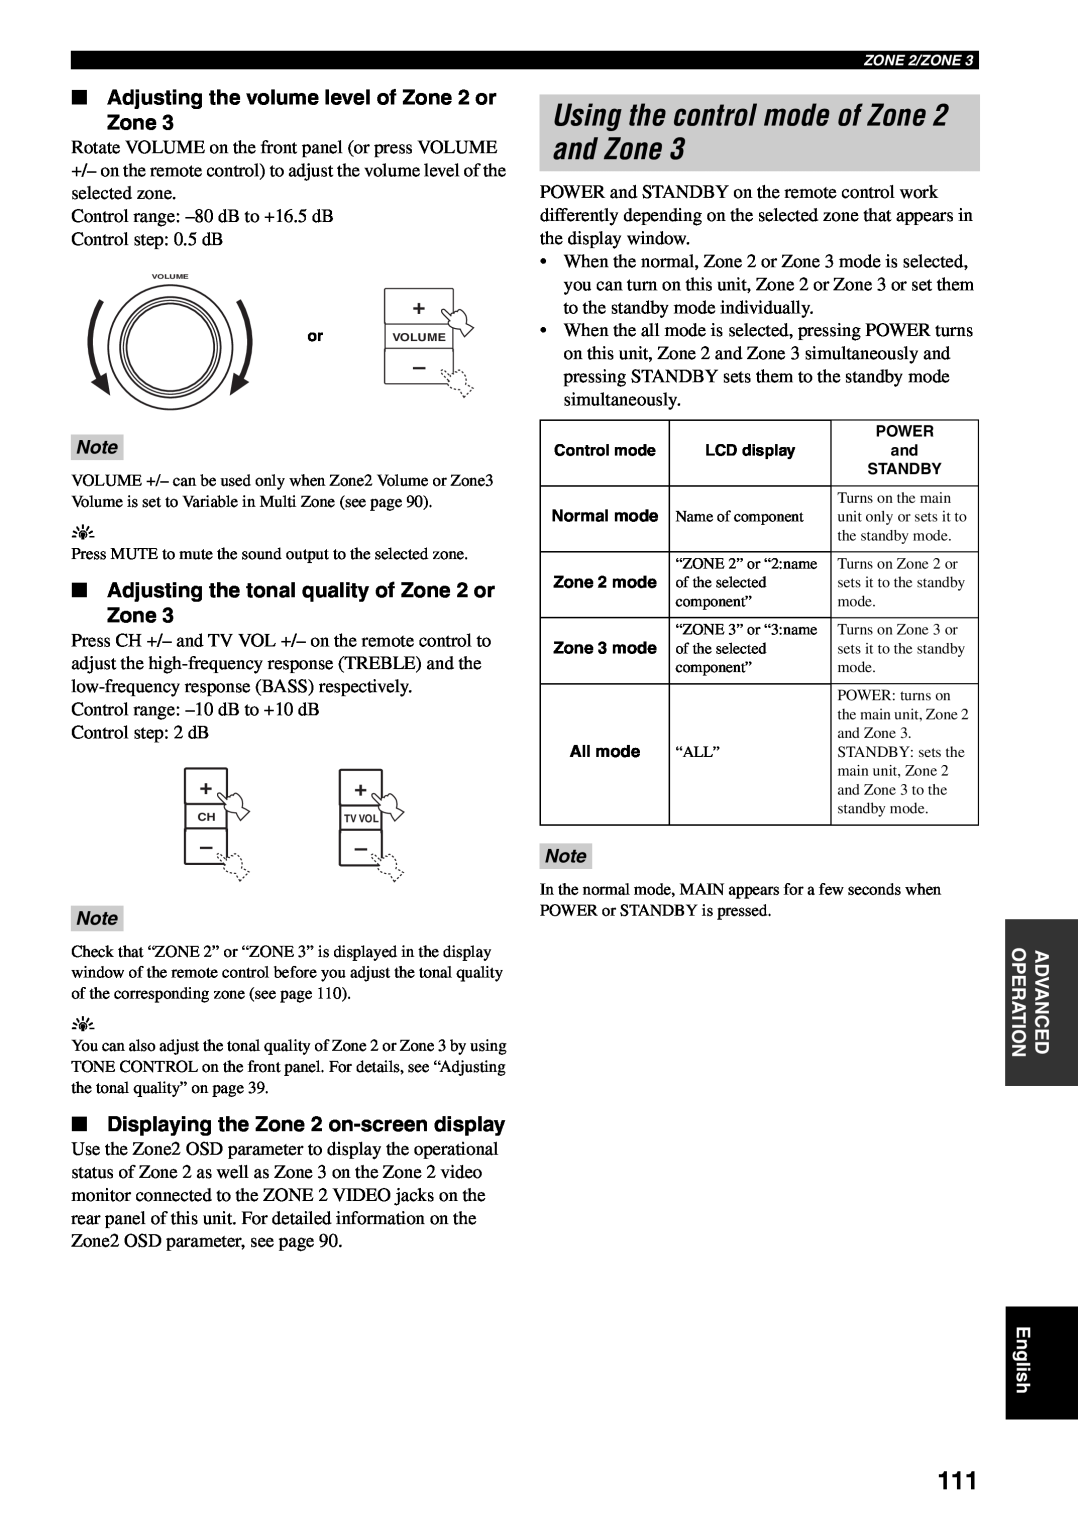 Yamaha RX-V2600 owner manual Using the control mode of Zone 2 and Zone, Adjusting the volume level of Zone 2 or Zone 